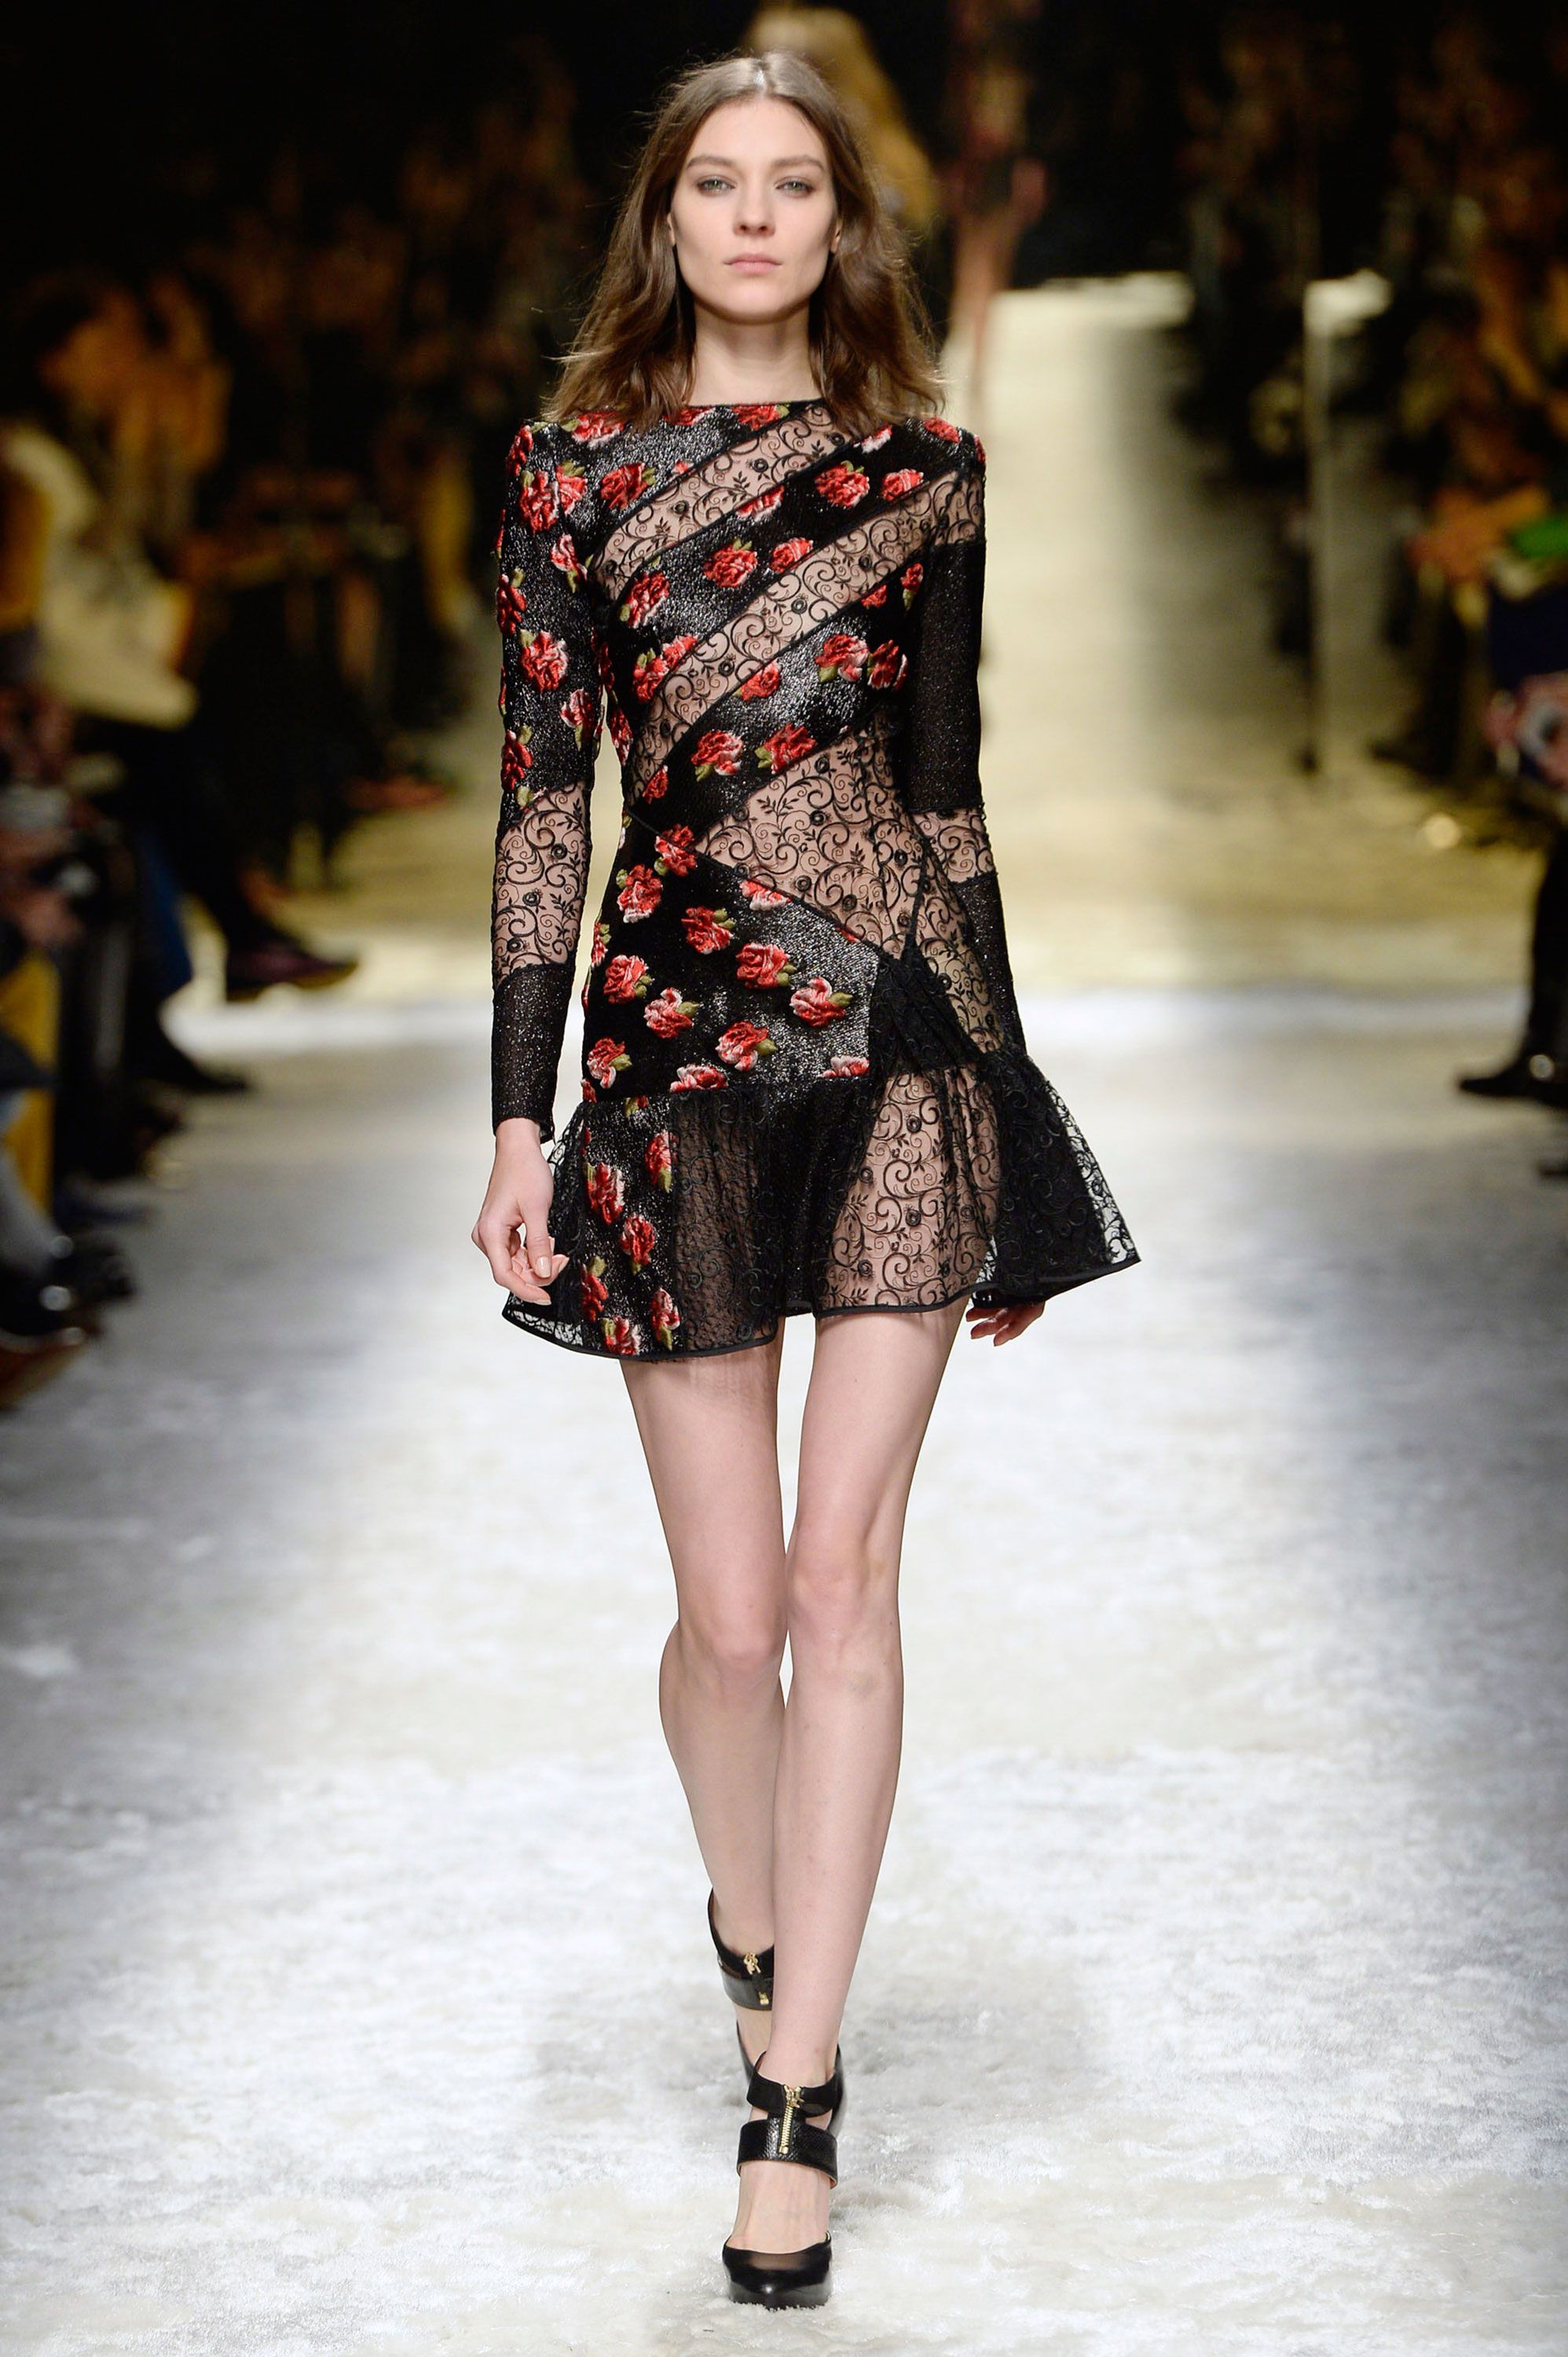 The Sexiest Dresses of Milan Fashion Week Designer Dresses Milan Fashion Week Fall 2014